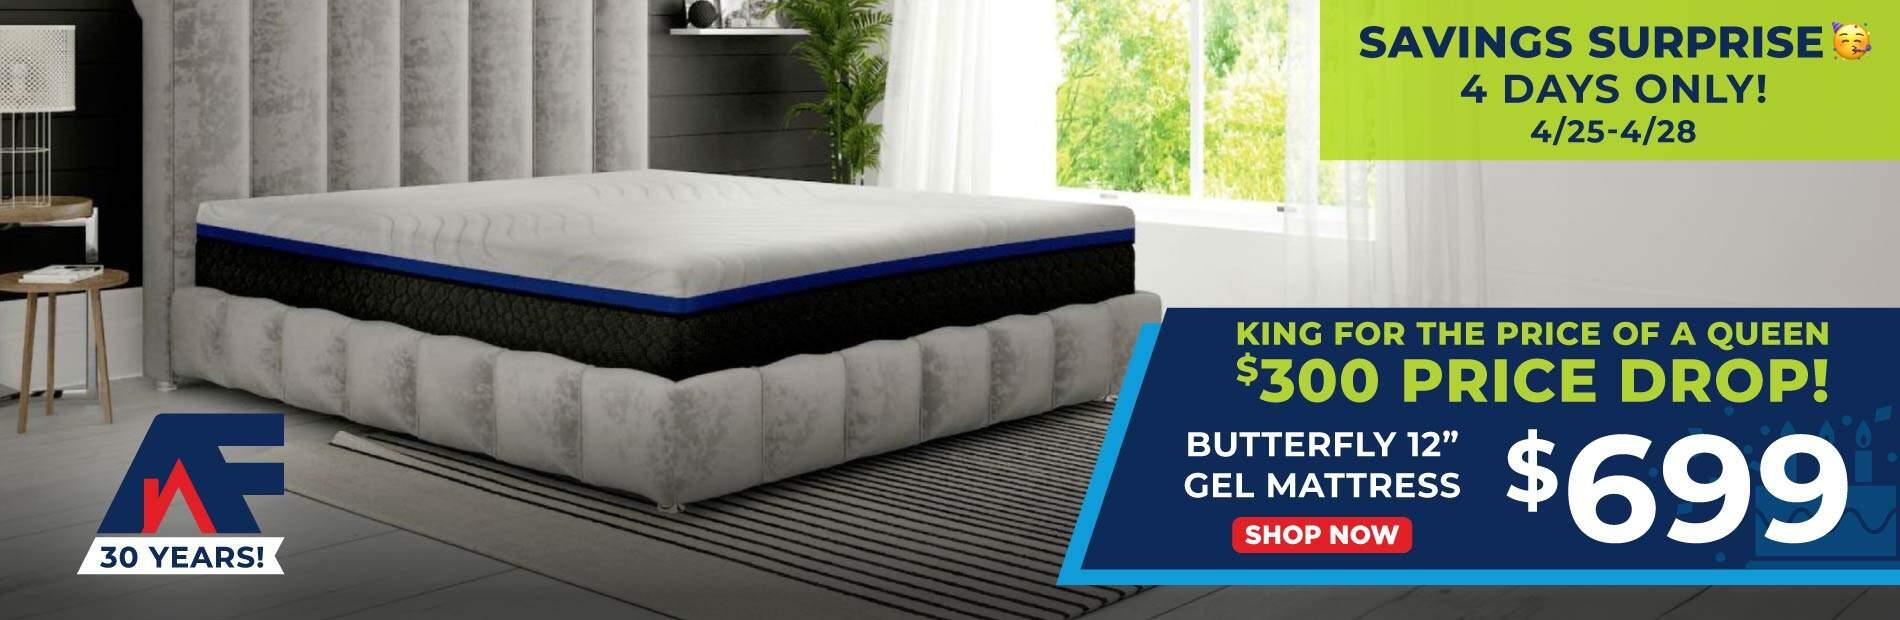 AF 30 Years. Savings Surprise! 4 Days Only! 4/25-4/28 King for the price of a queen. $300 price drop. Butterfly 12" Gell Mattress $699.99. Shop Now.